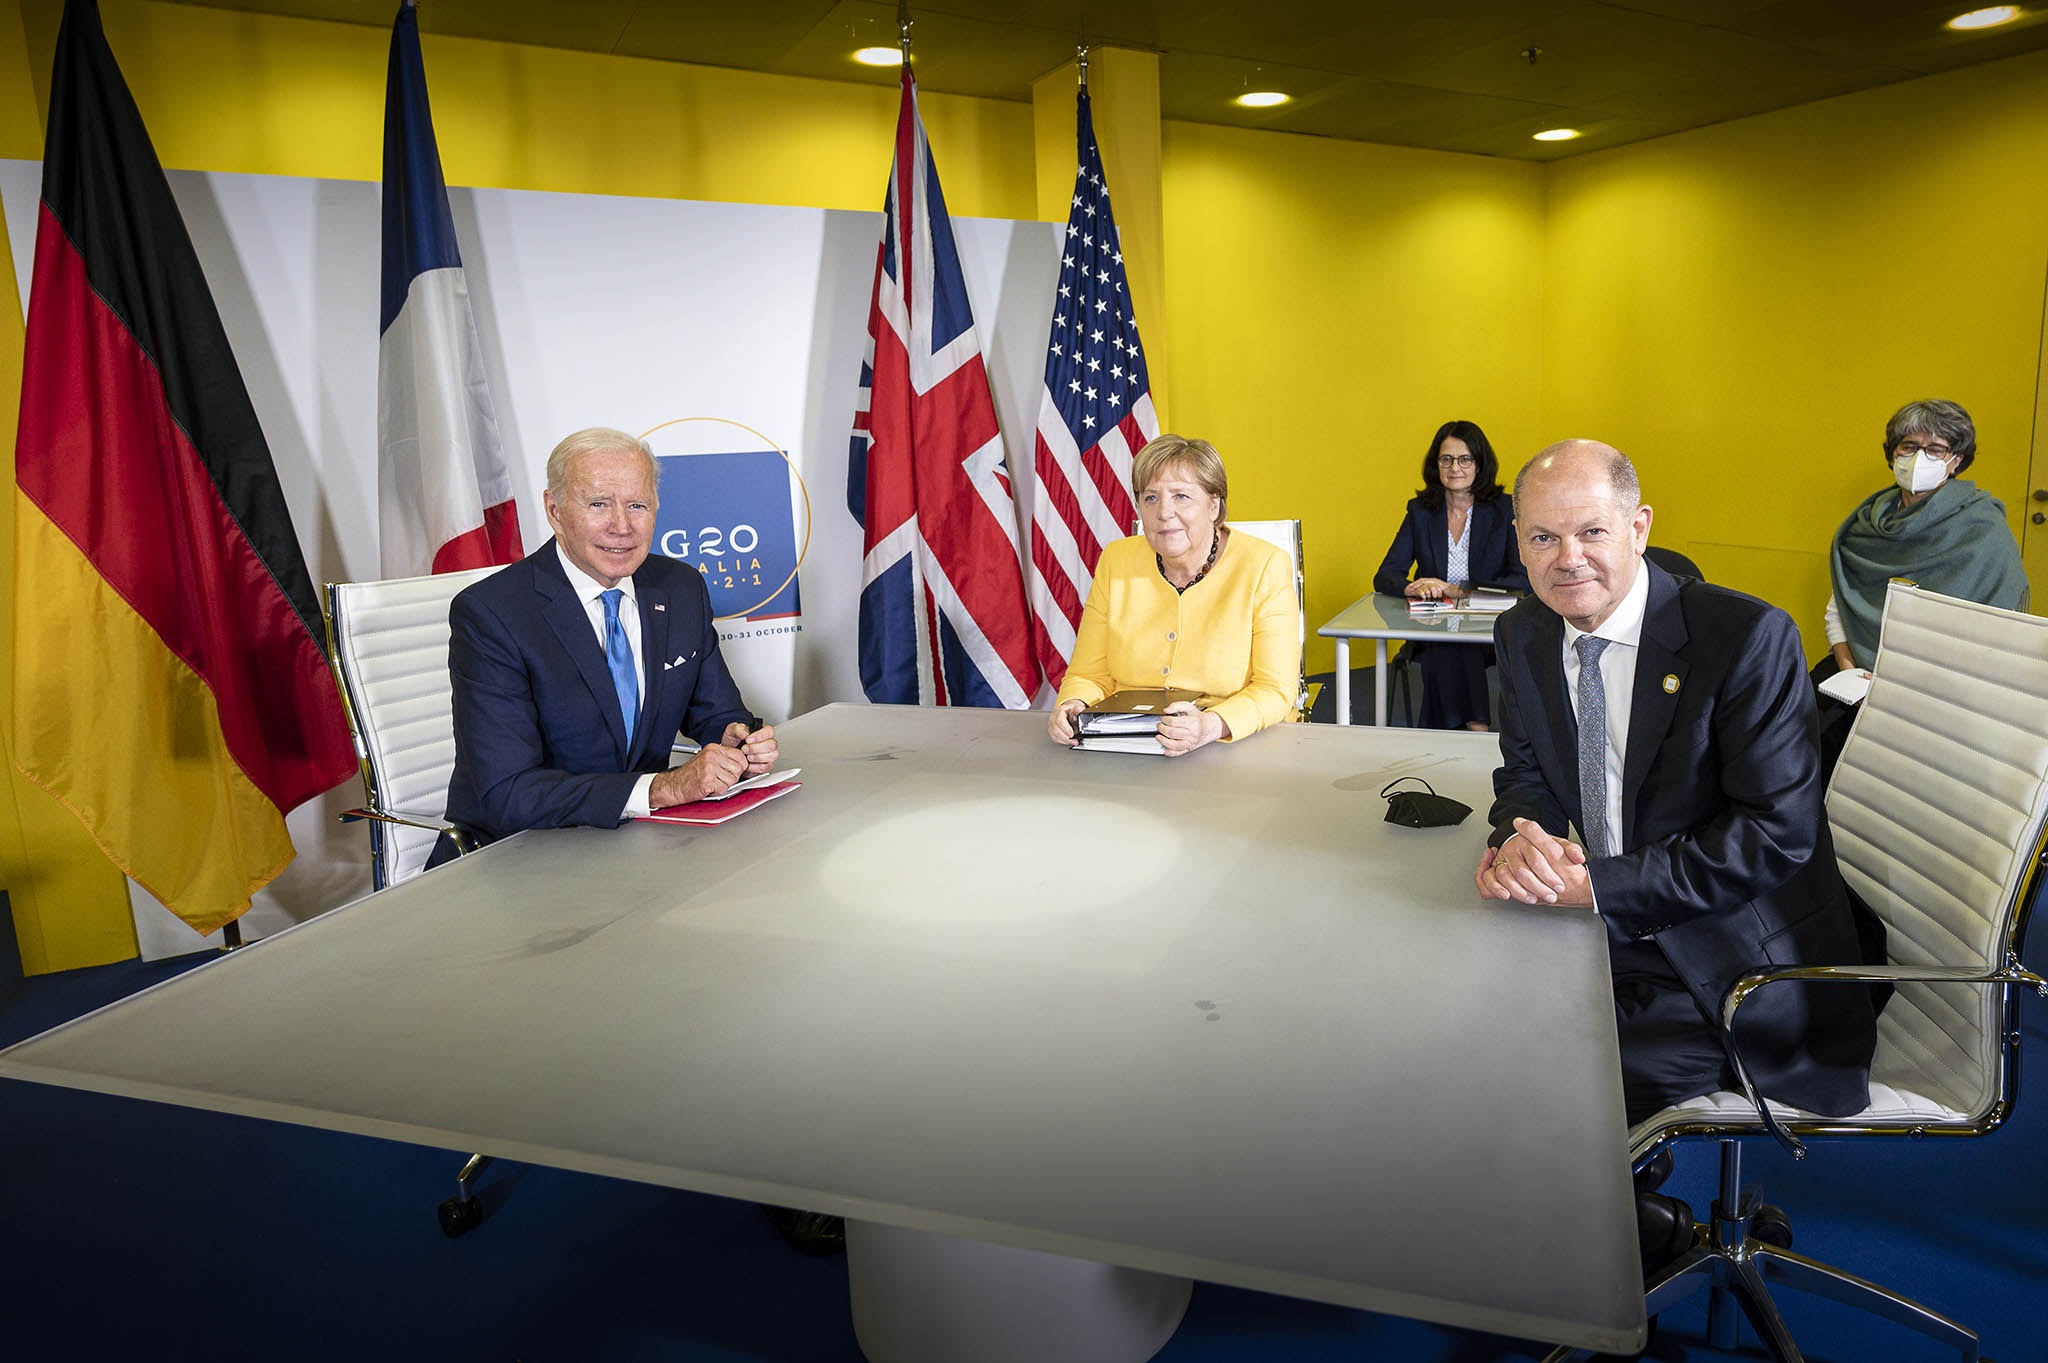 Federal Chancellor Merkel and Federal Finance Minister Scholz in a bilateral meeting with President Biden of the USA on the fringe of the G20 summit.